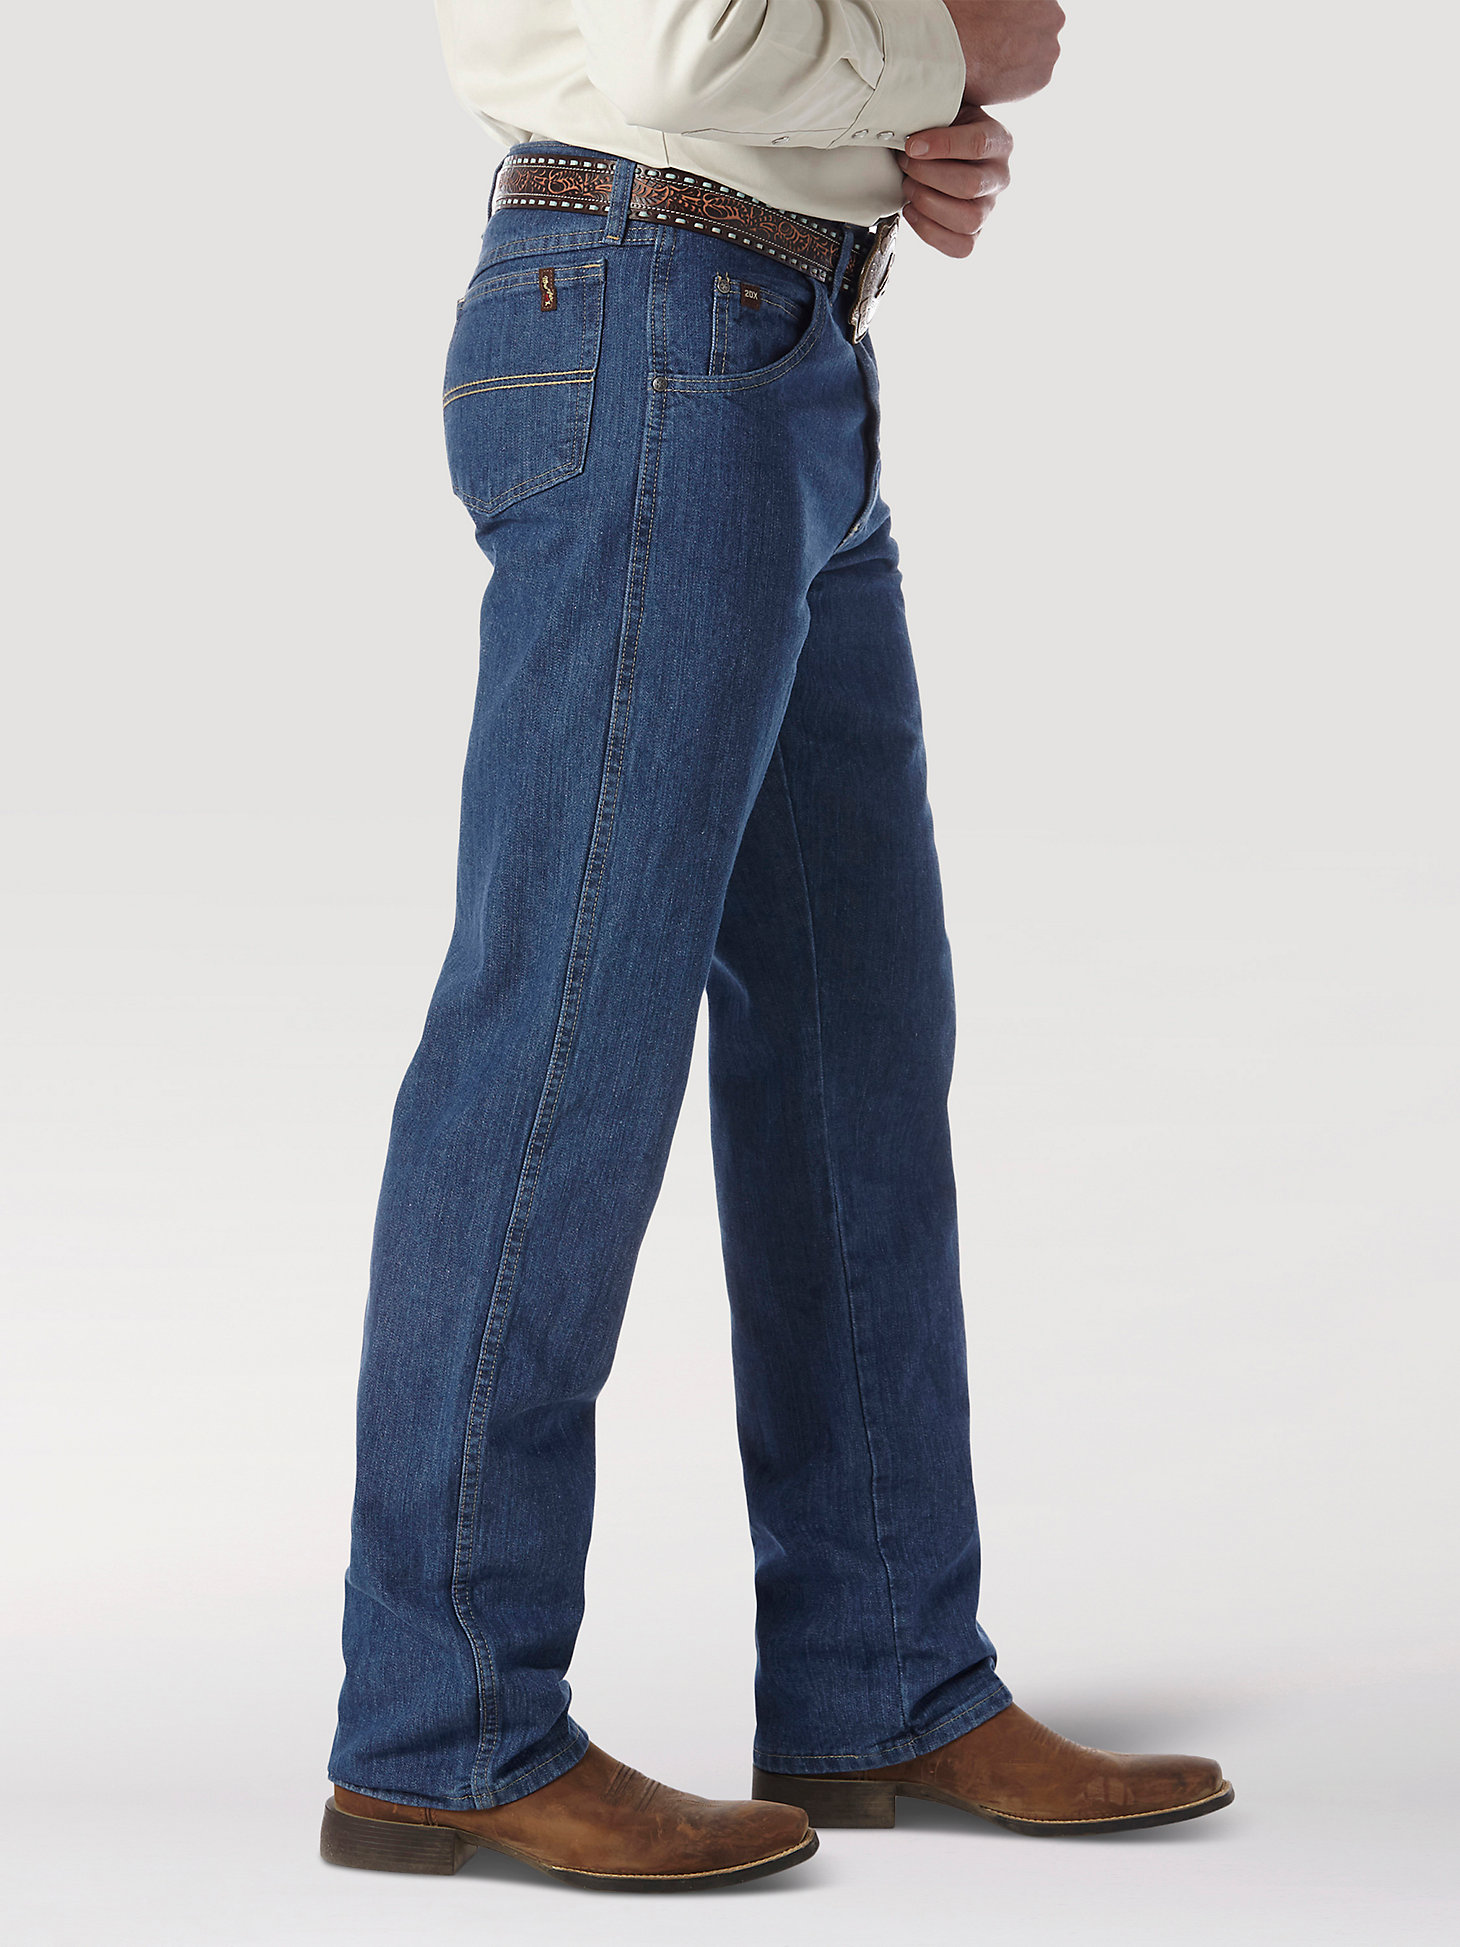 Wrangler® 20X® No. 23 Relaxed Fit in Vintage Blue alternative view 1